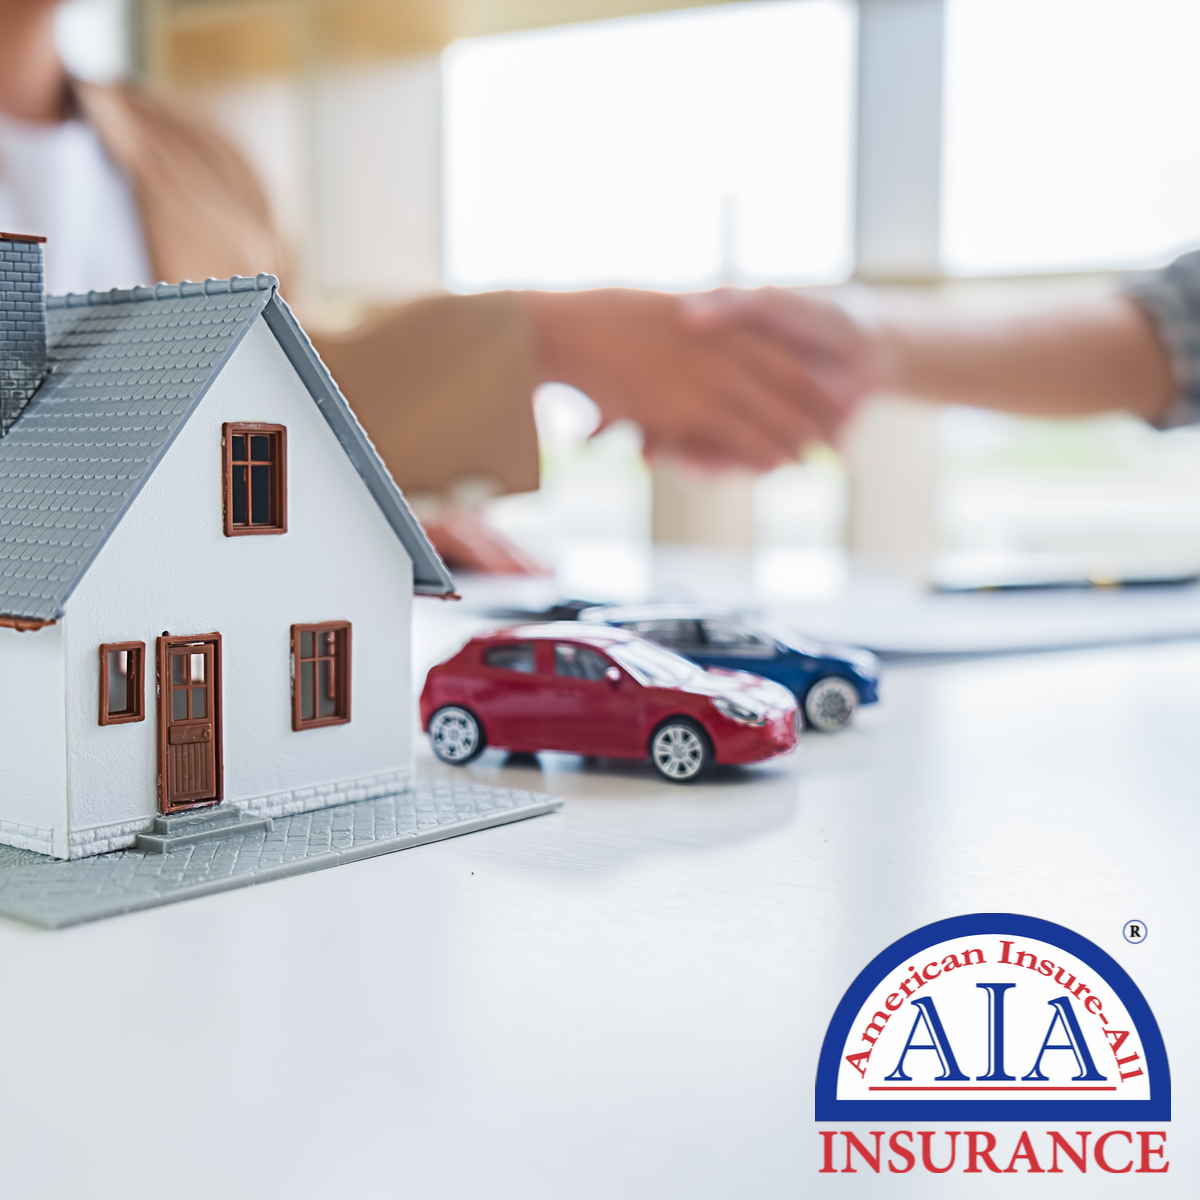 American Insure-All®: You Can Rely on Our Brokers for Affordable Car Insurance Plans!